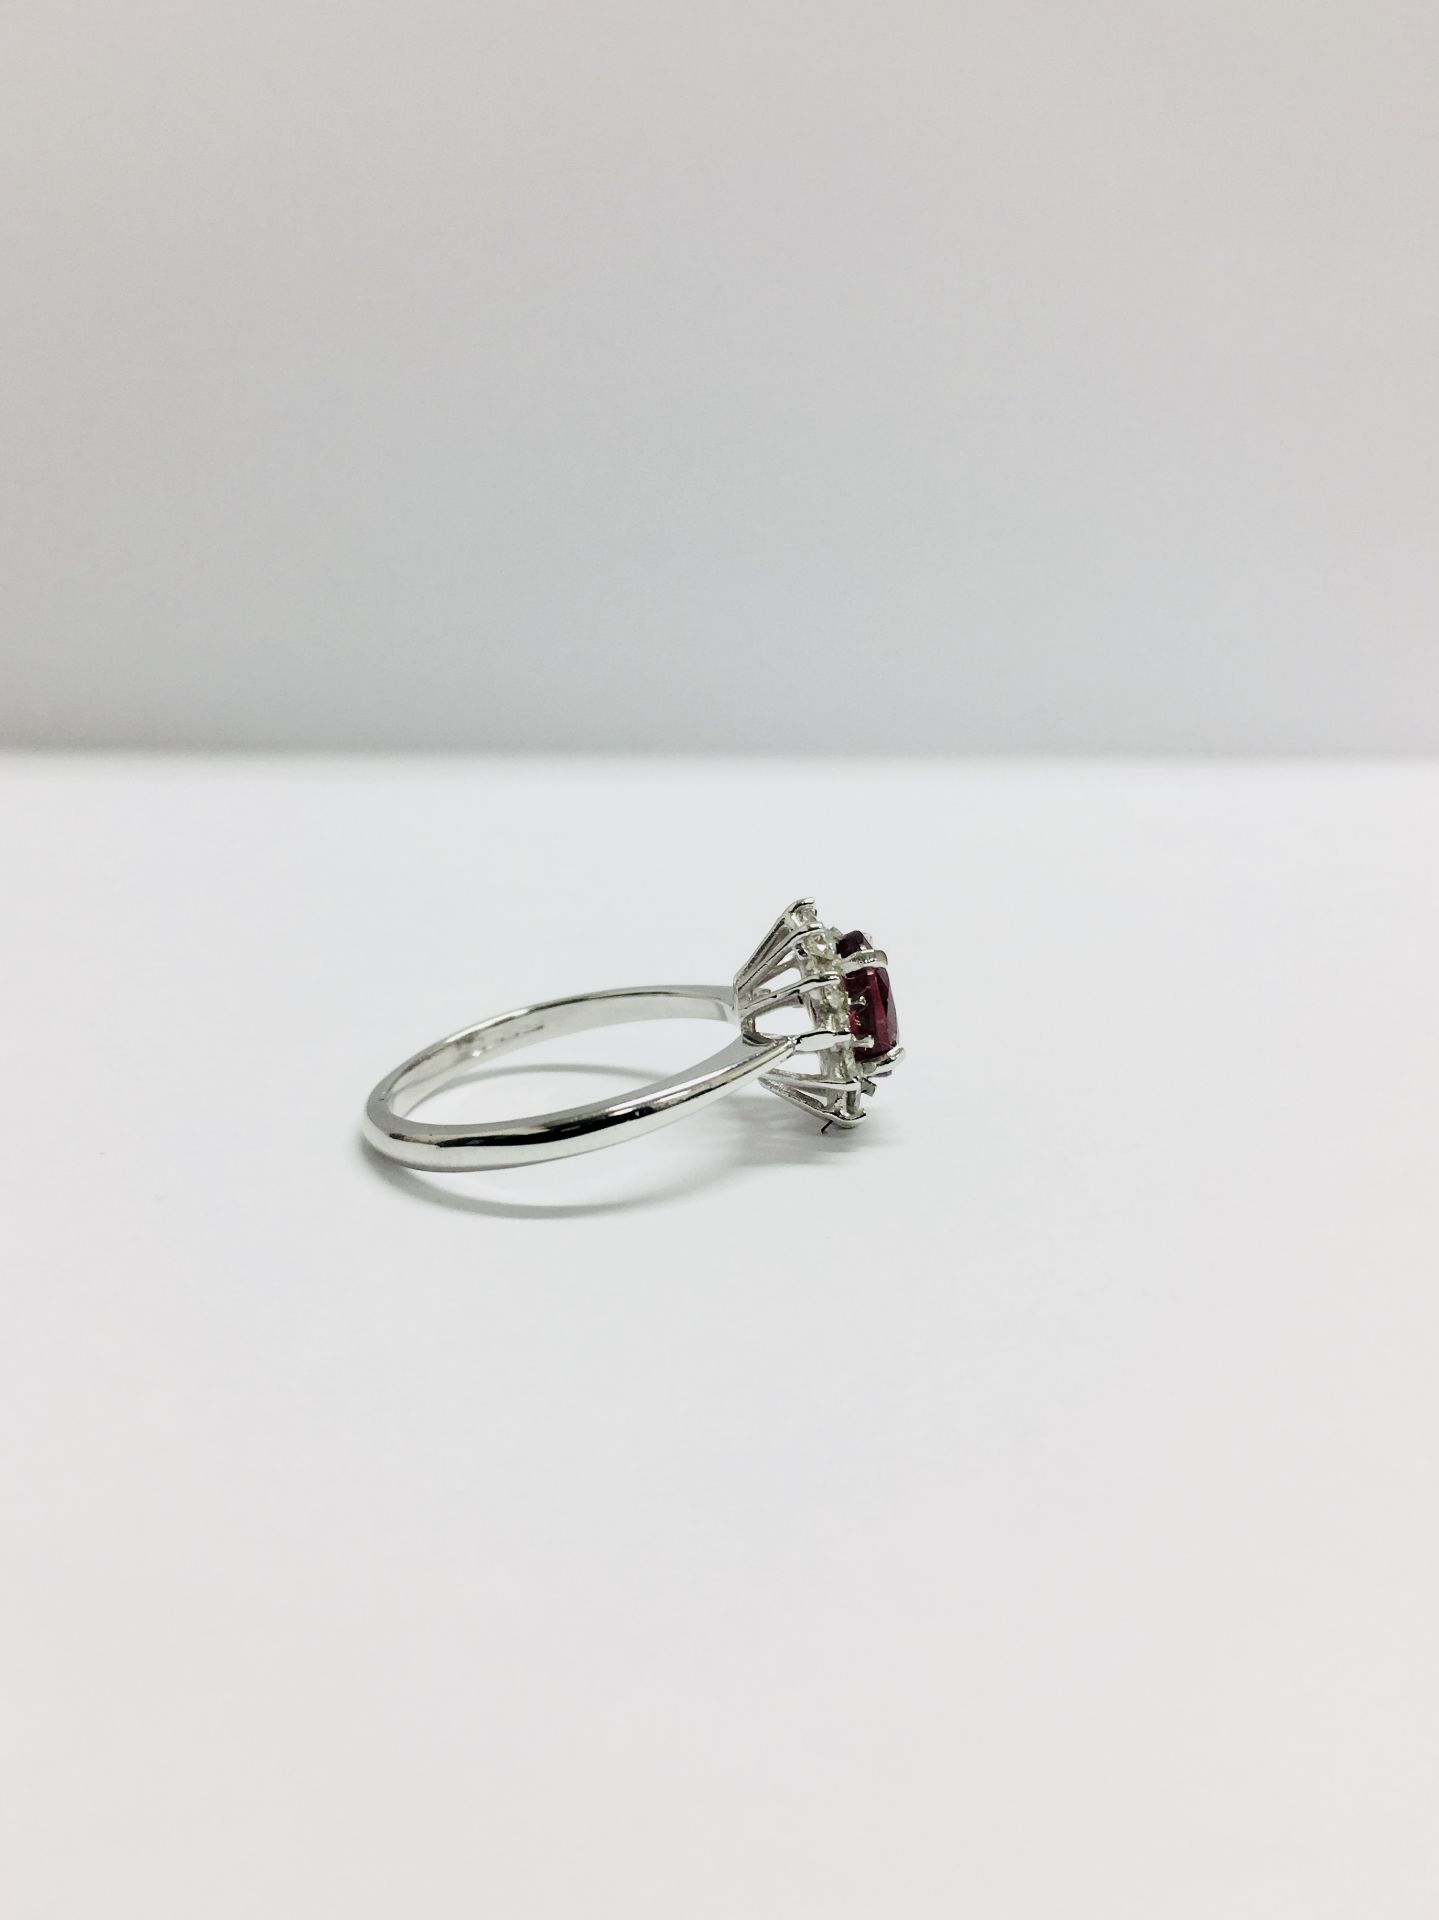 0.80Ct Ruby And Diamond Cluster Ring Set With A Oval Cut(Glass Filled) Ruby - Image 4 of 5